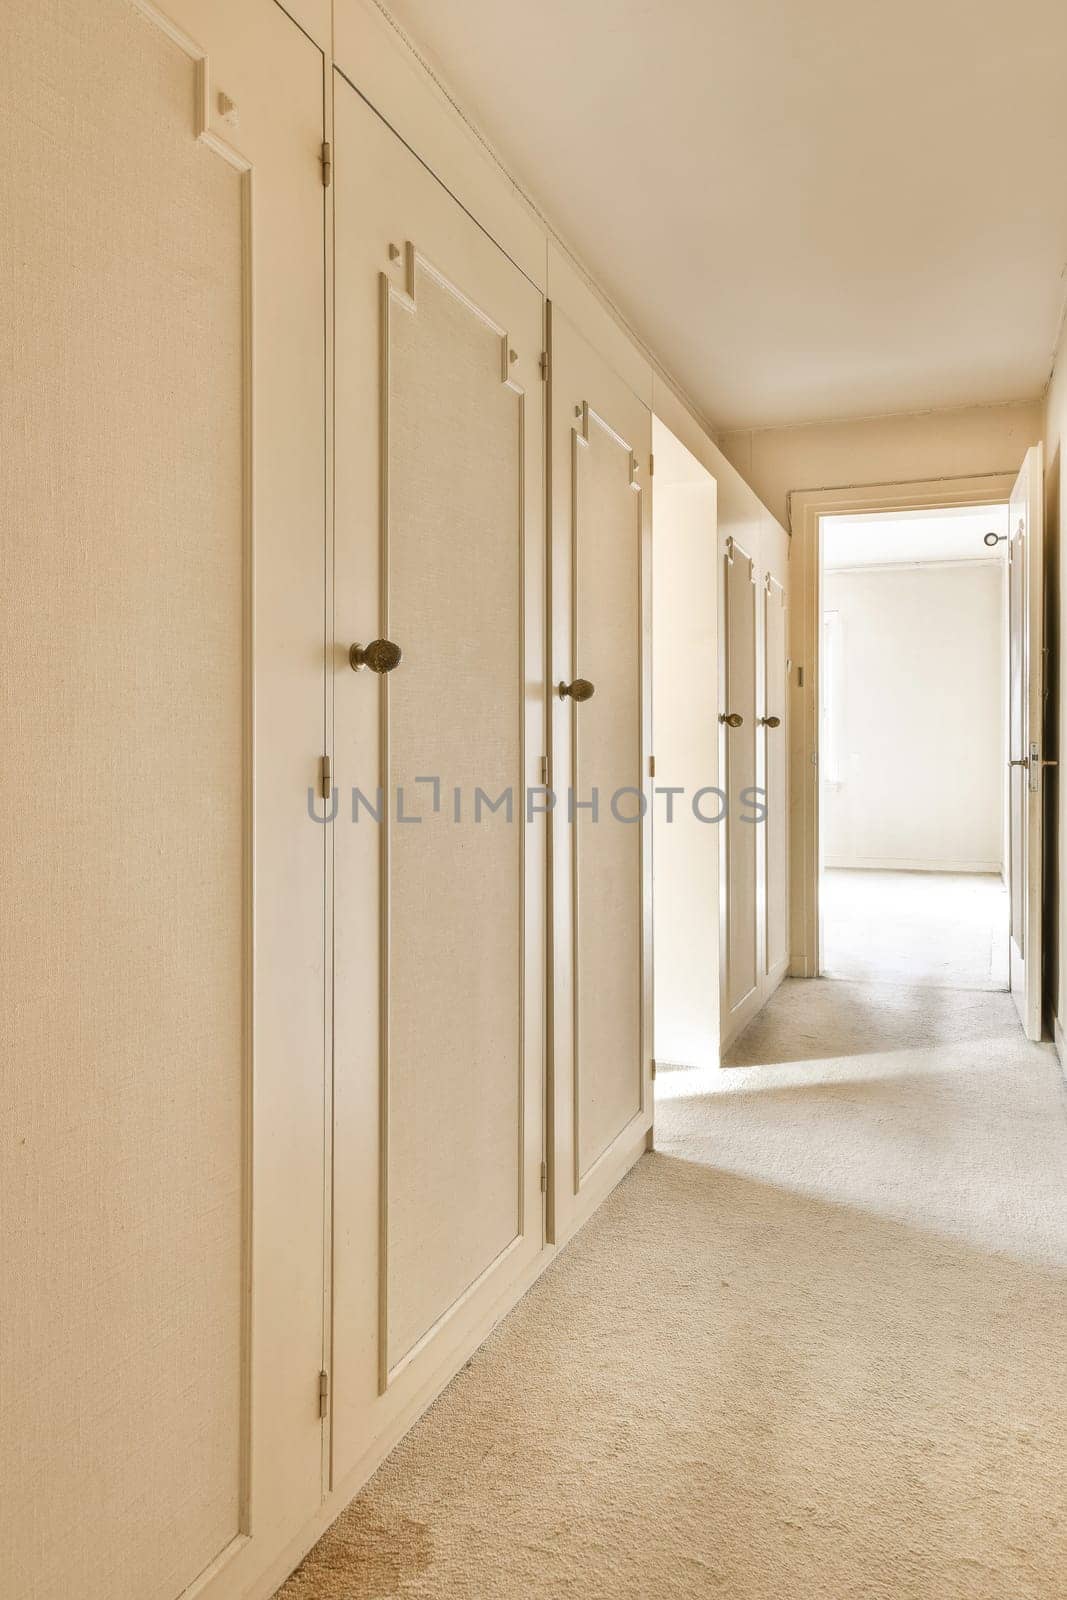 an empty room with white walls and beige carpeting, there is no one person in the room to be seen